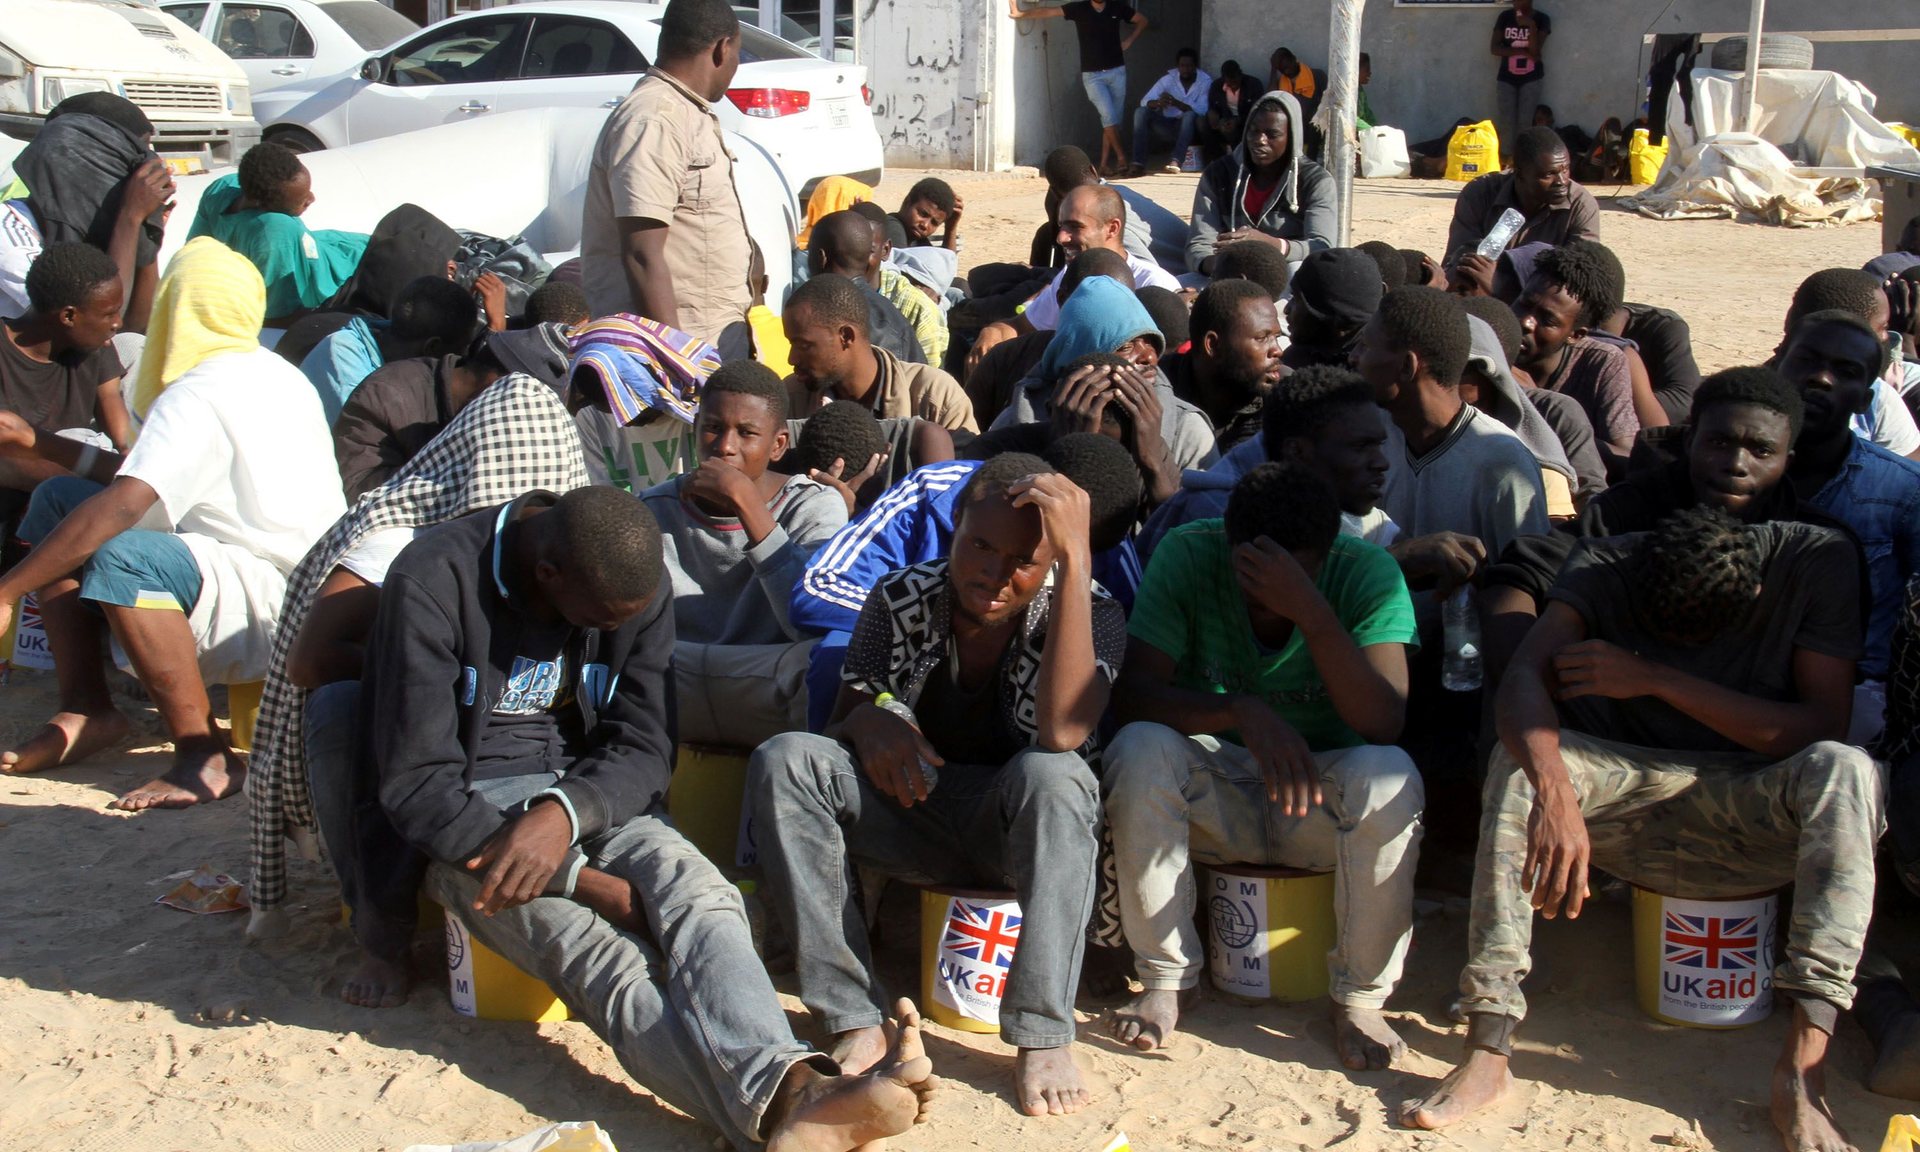 Migrants in Tagiura, east of the Libyan capital Tripoli. The UK’s work in Libya includes support for economic and human rights initiatives. Photograph: AFP/Getty Images